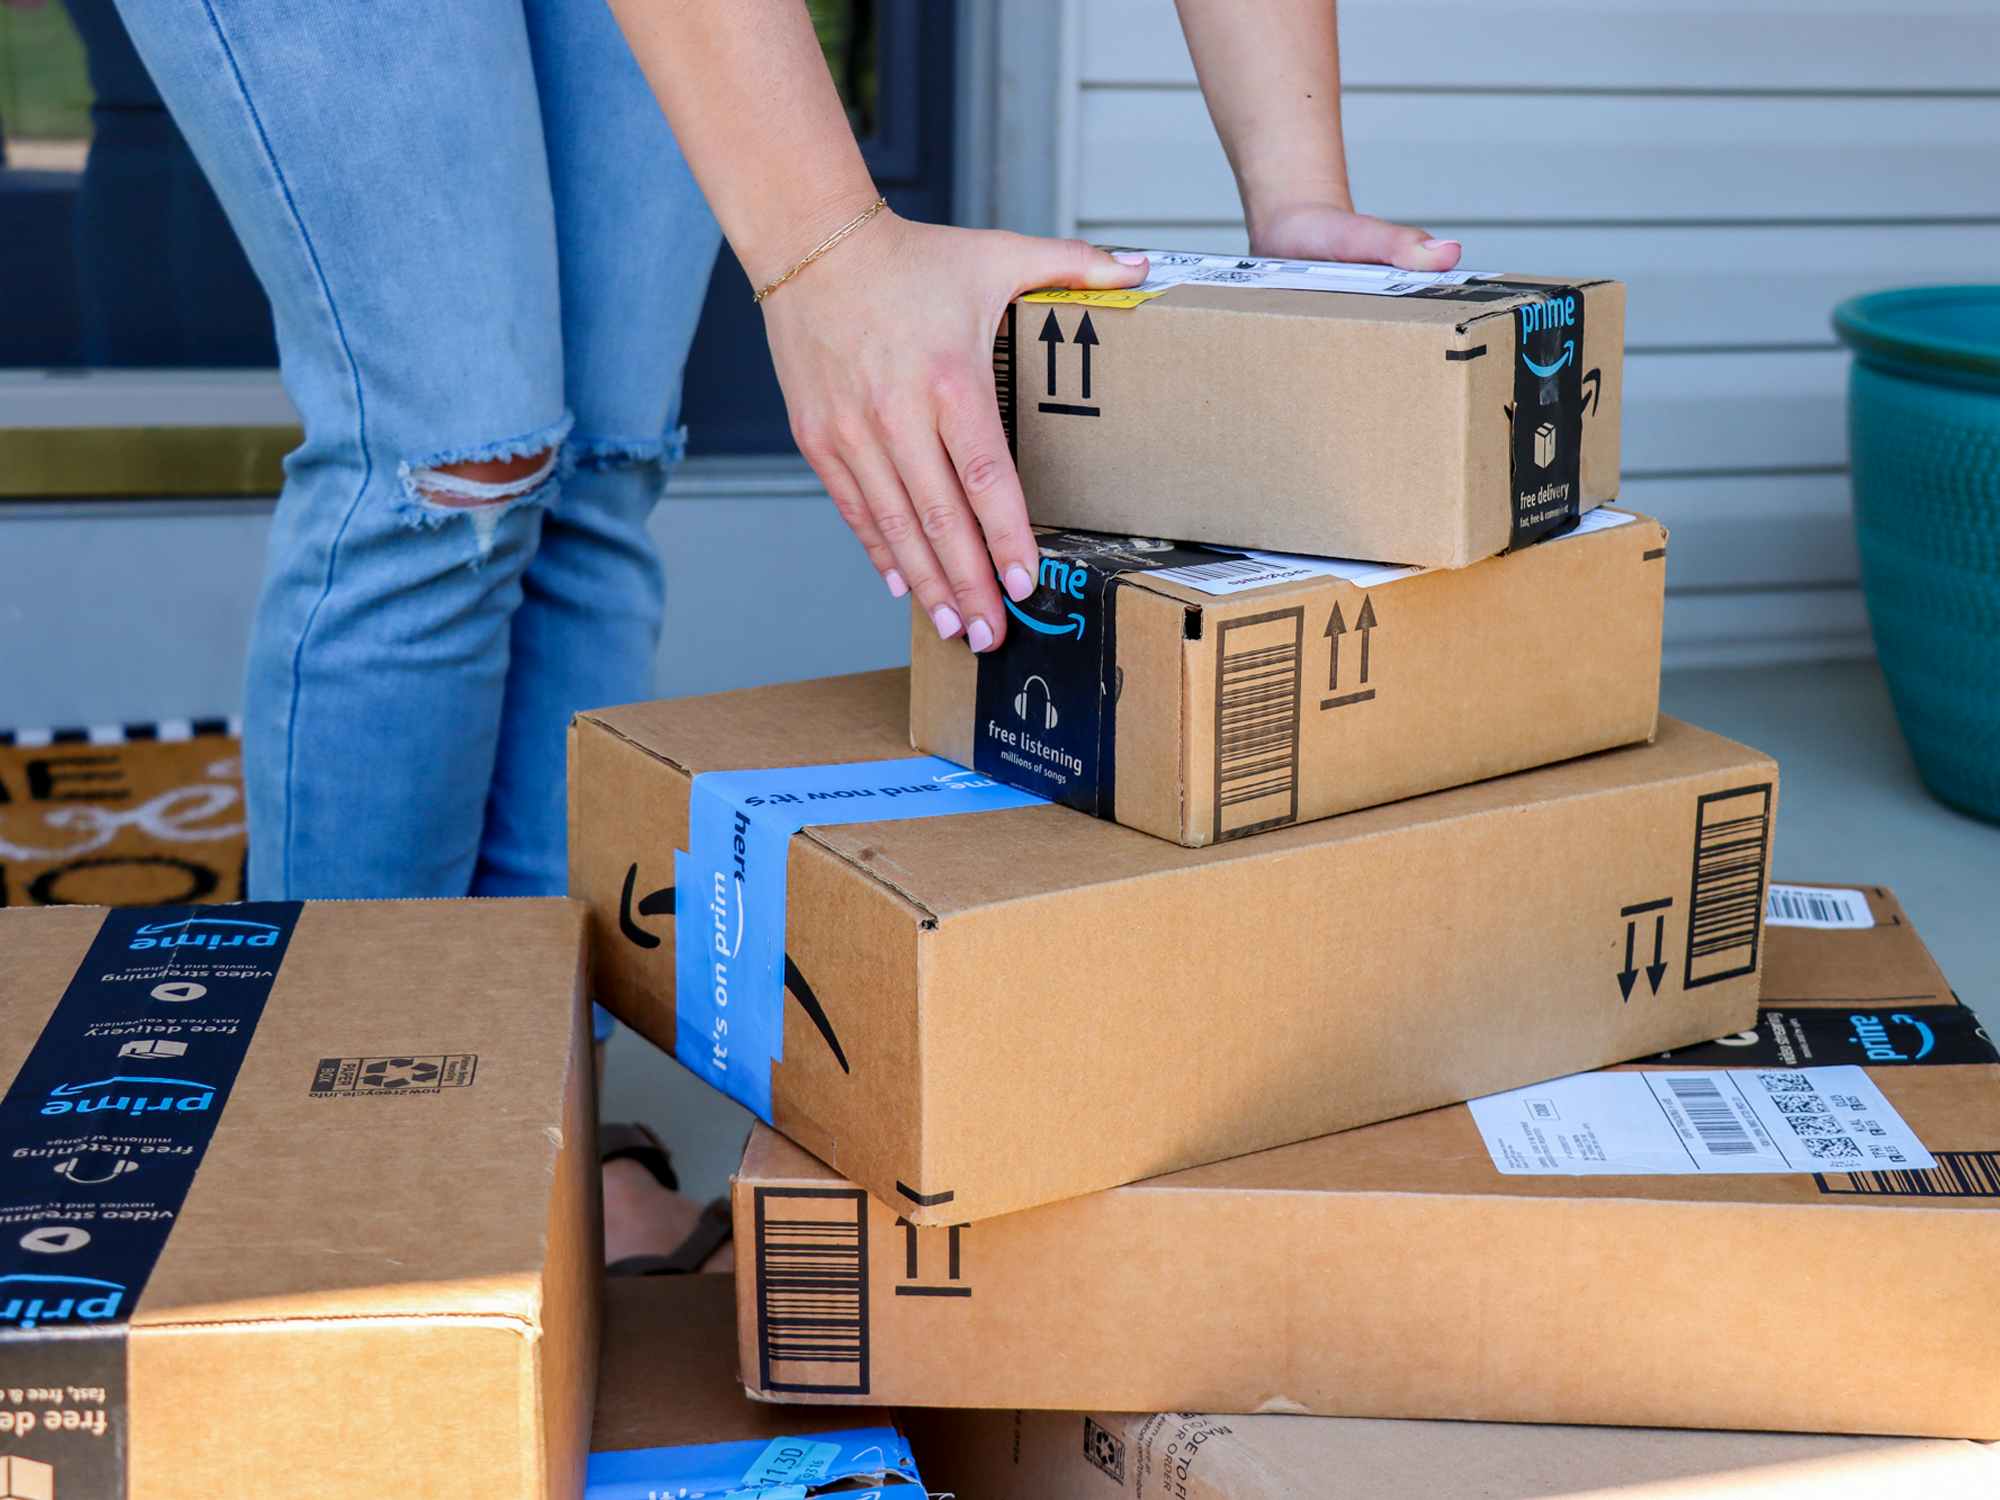 How to get early deals ahead of  Prime Big Day 